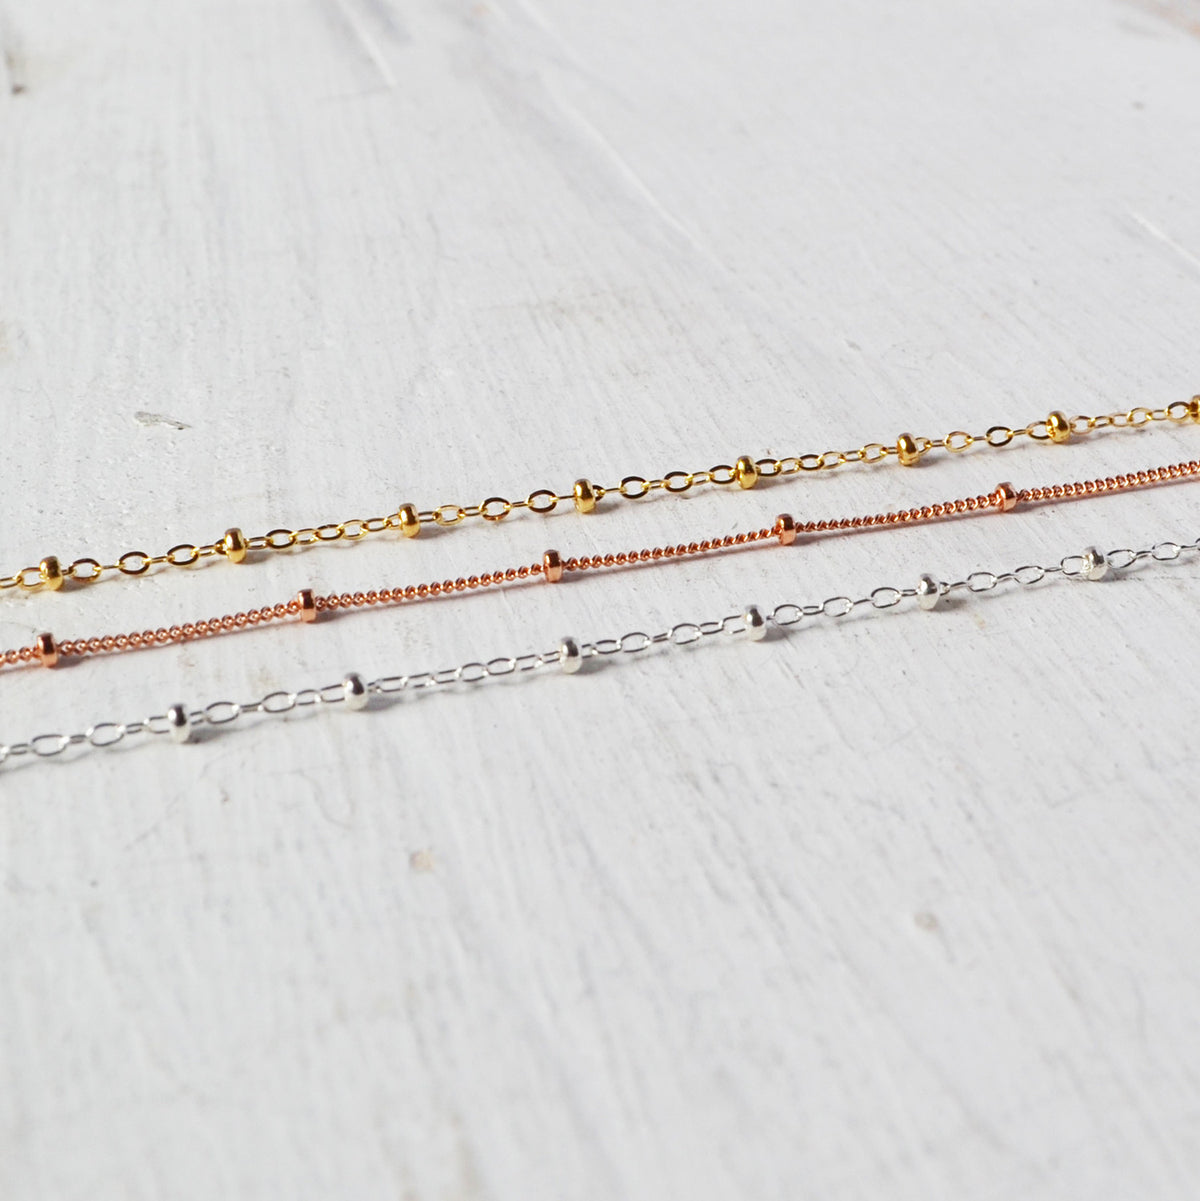 Ball and Chain Choker, Gold, Rose Gold, or Silver